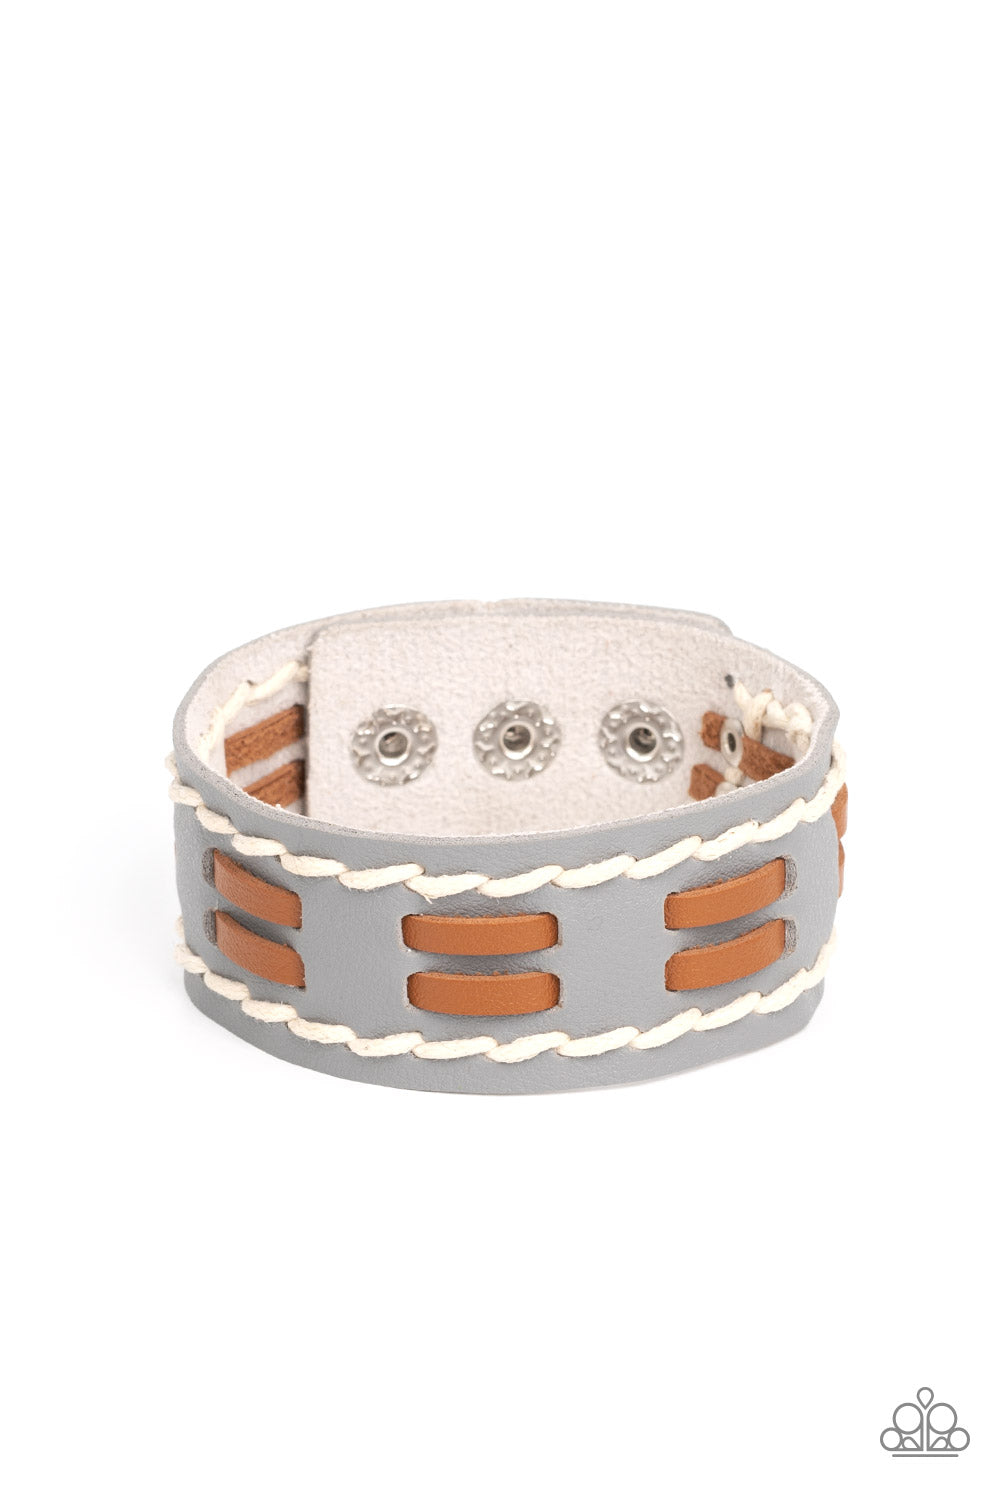 In the FRONTIER Running - Silver/Gray Leather & Brown Leather Laces Paparazzi Snap Bracelet